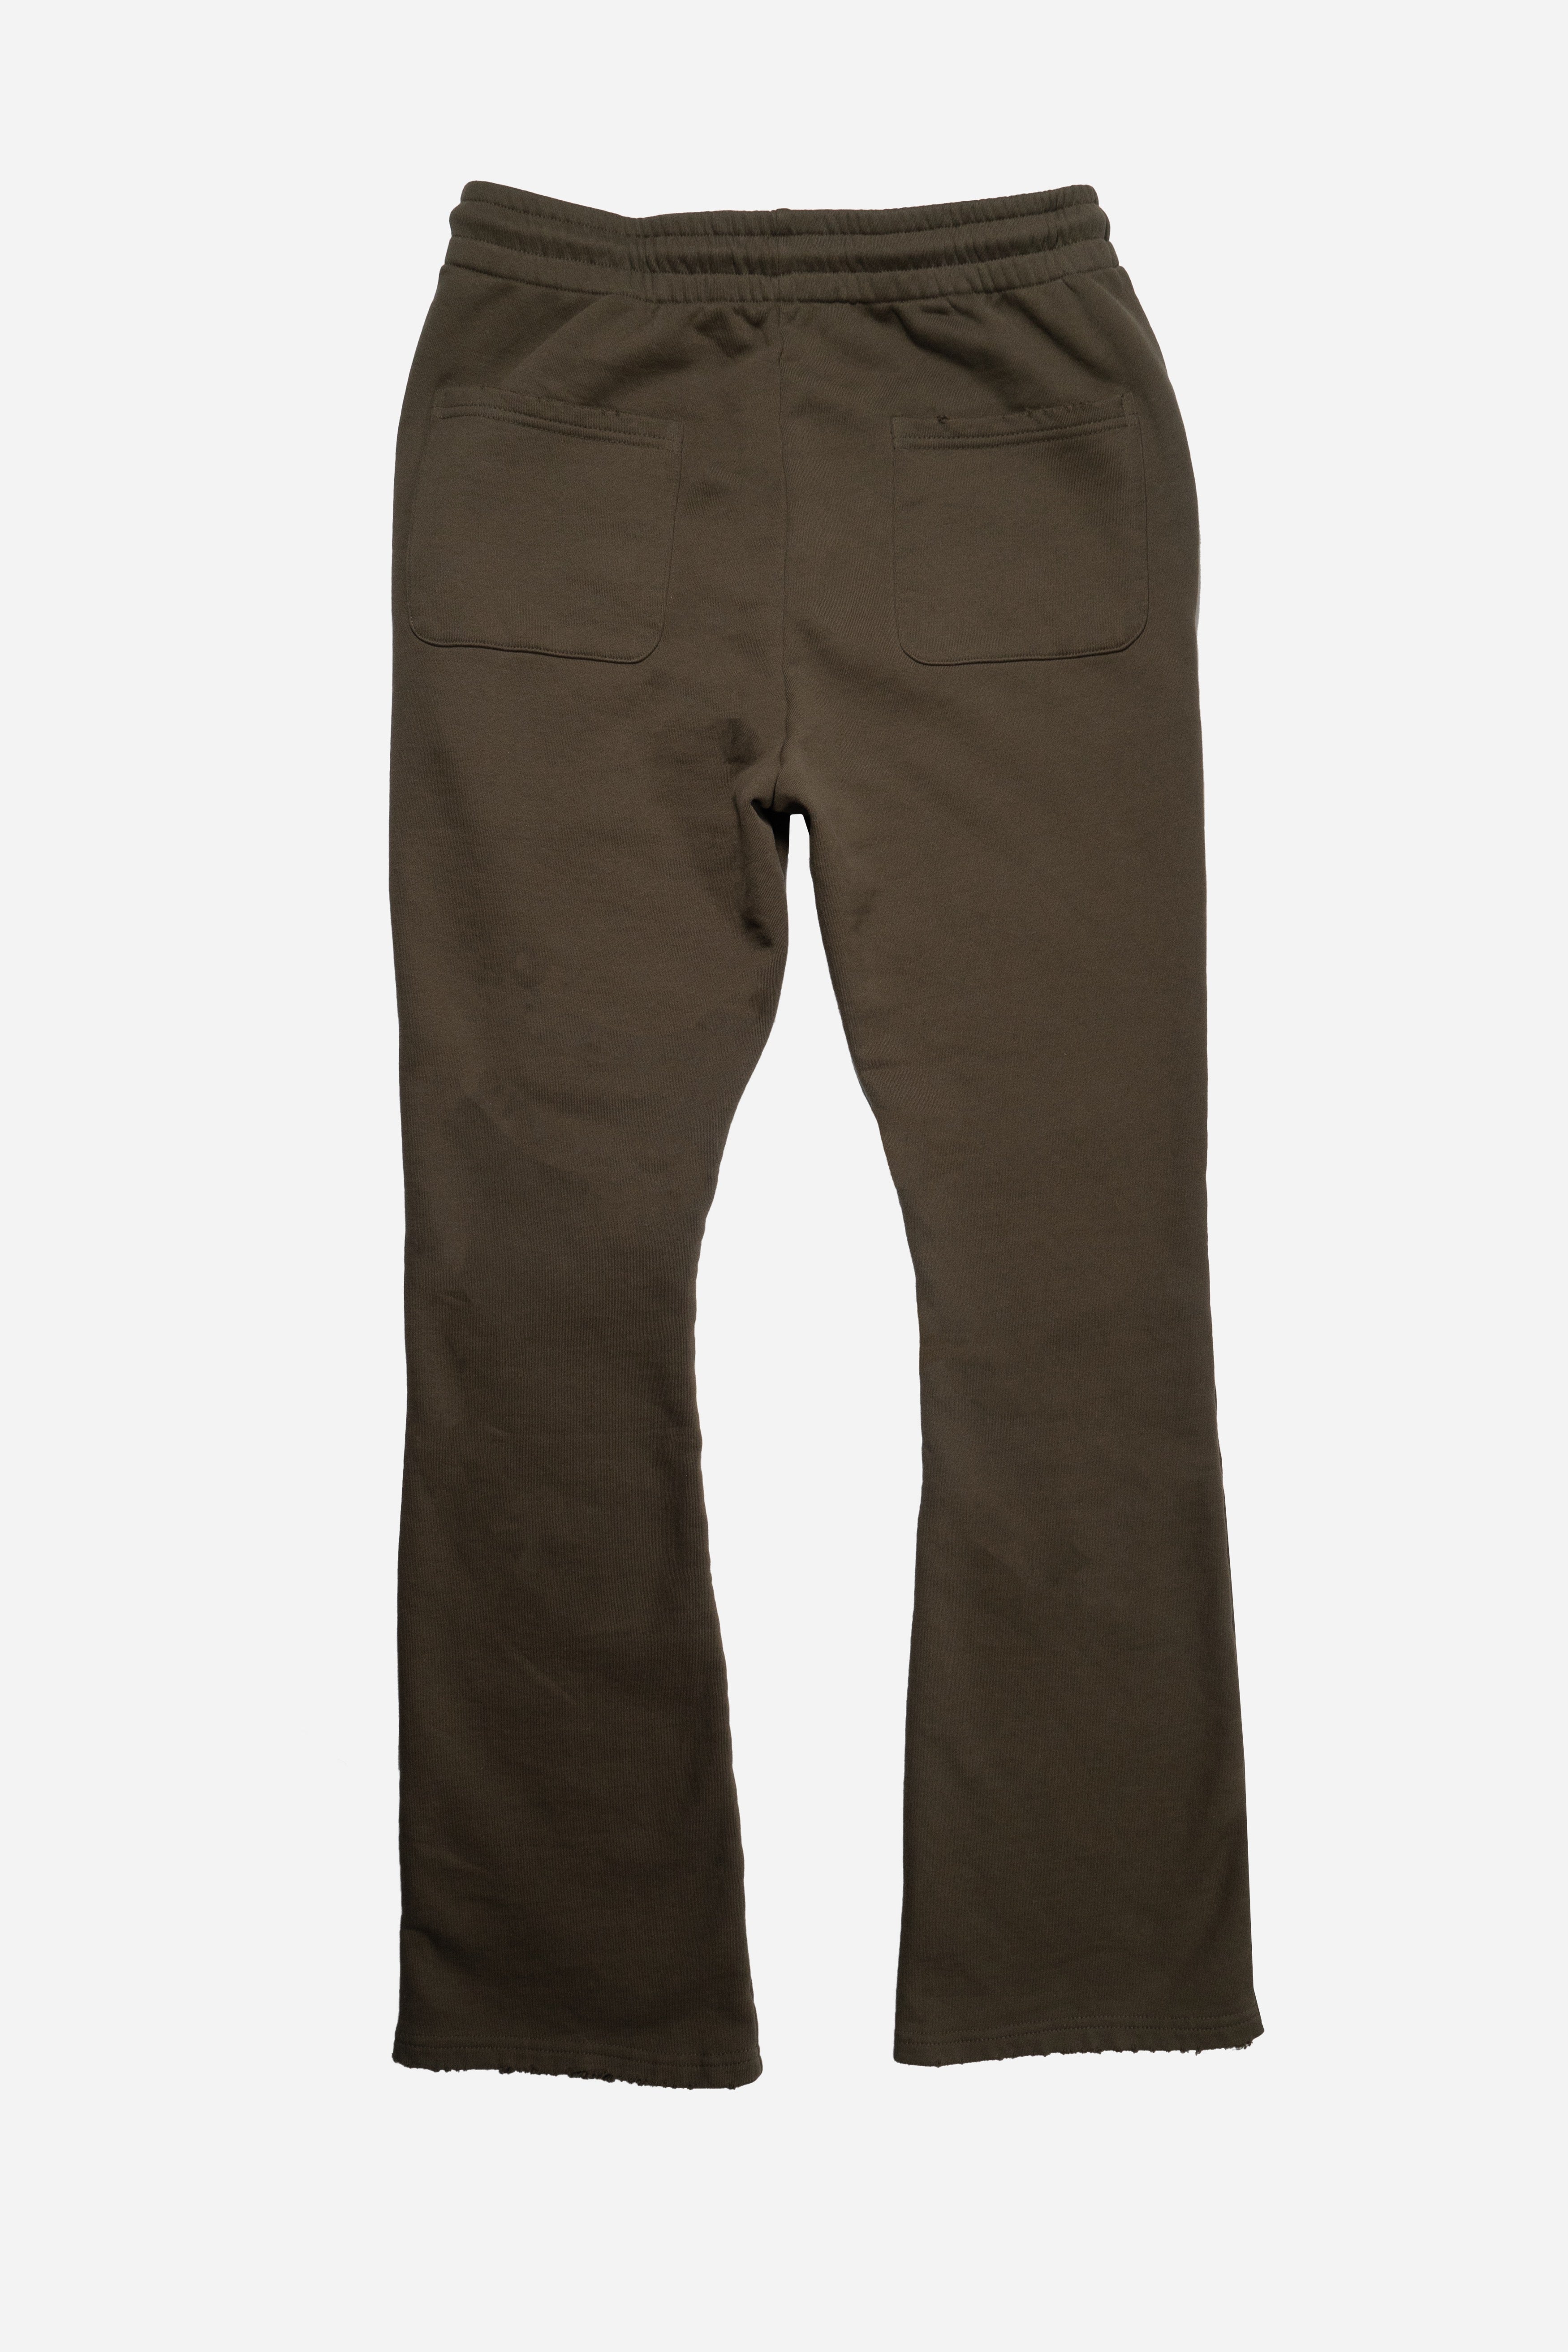 6thNBRHD STACKED FLEECE PANTS "EXTRA" OLIVE